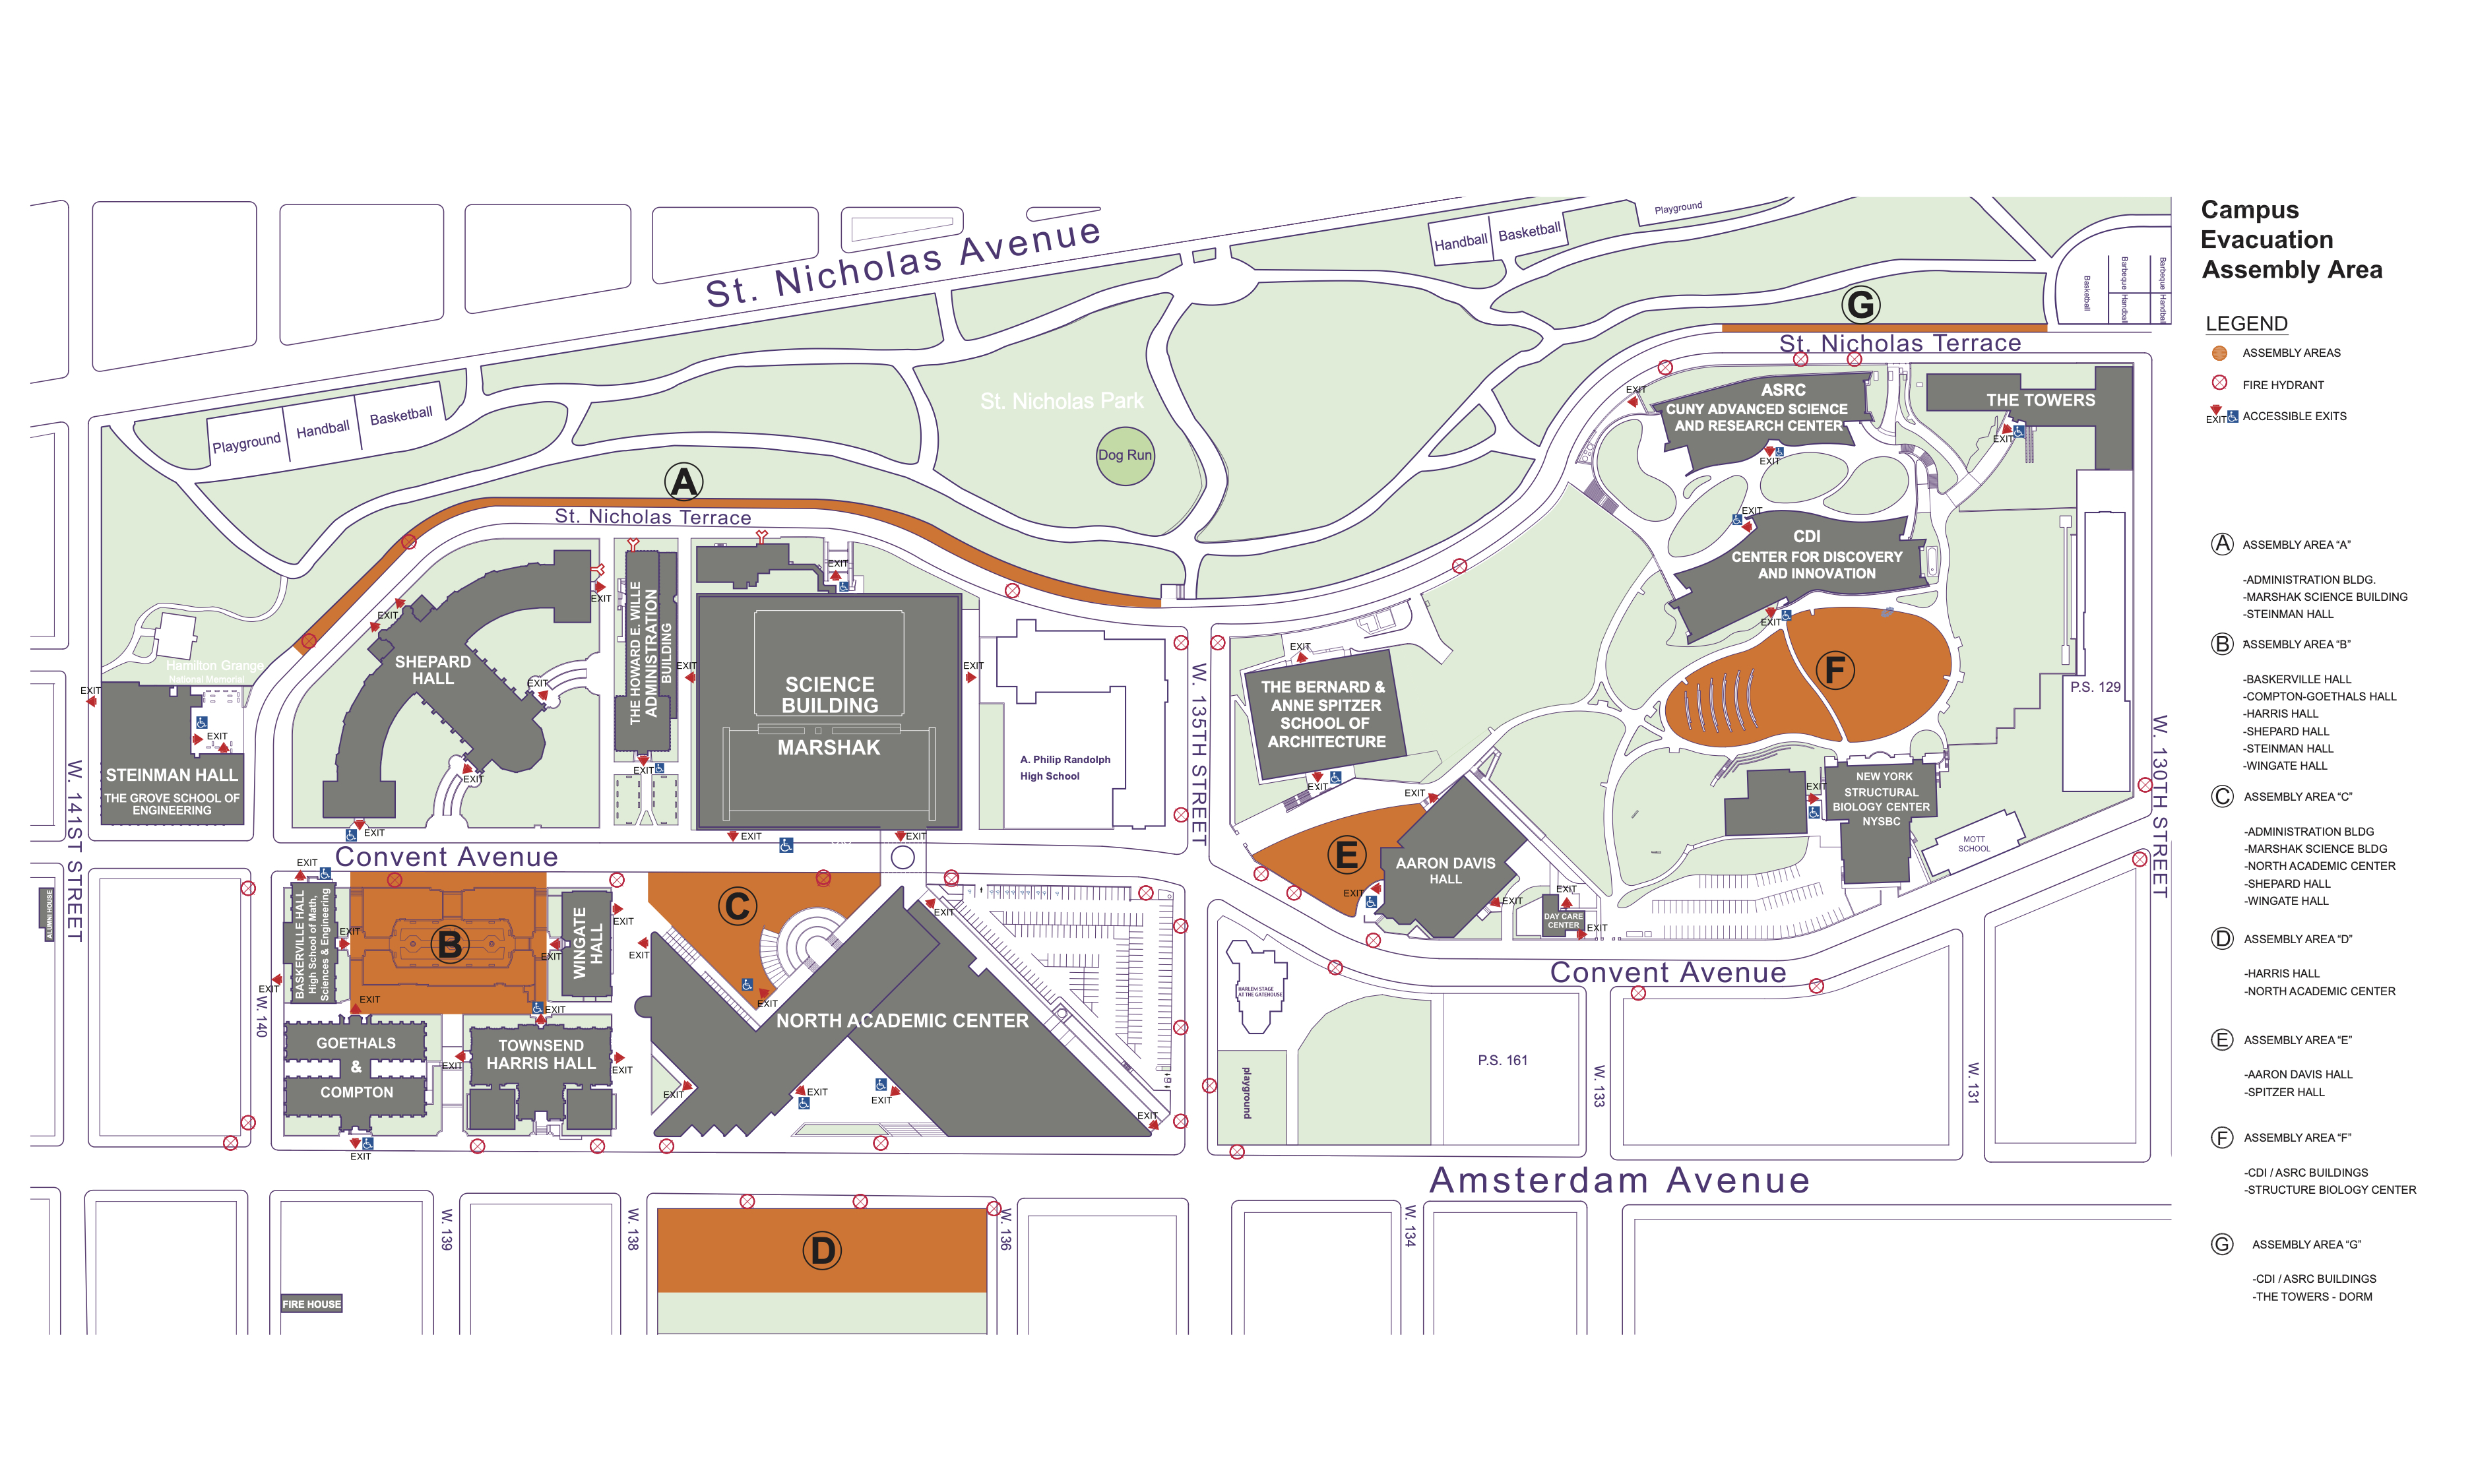 Campus Map   Assembly Areas   Complete Campus 